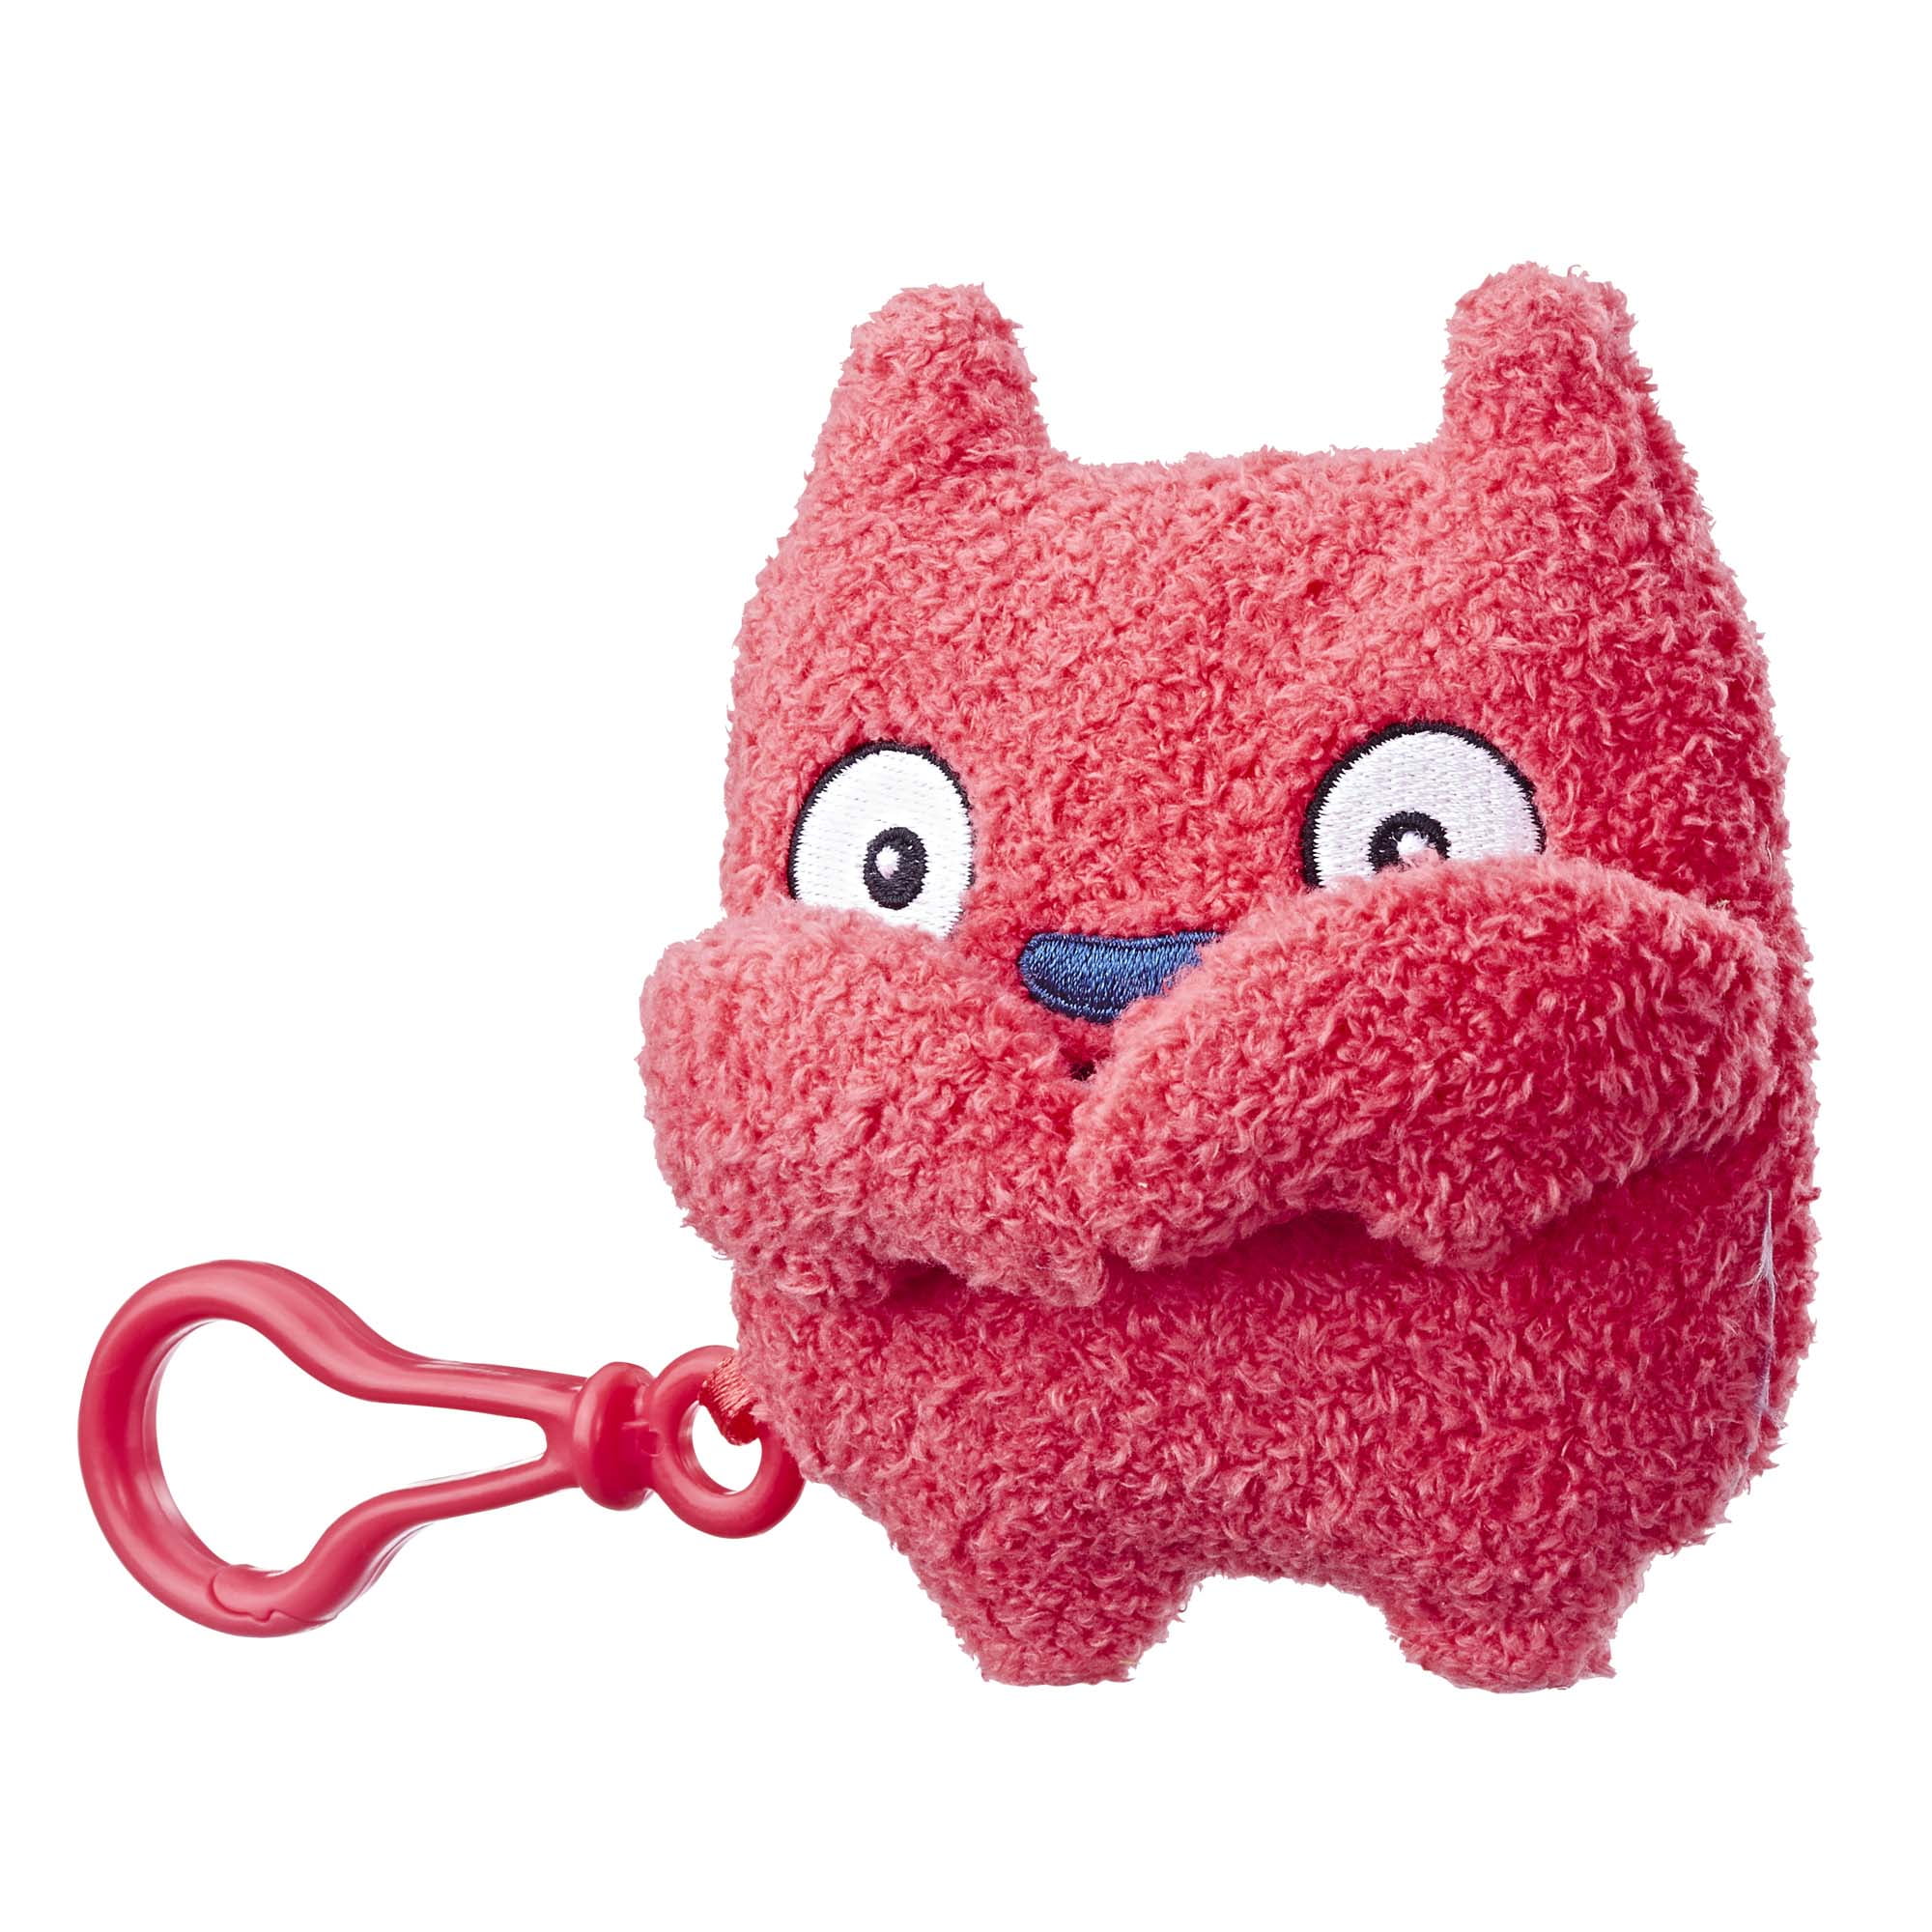 Hasbro Ugly Dolls Moxy To-Go Stuffed Plush Toy MOXY 5"  Pink Backpack Clíp 